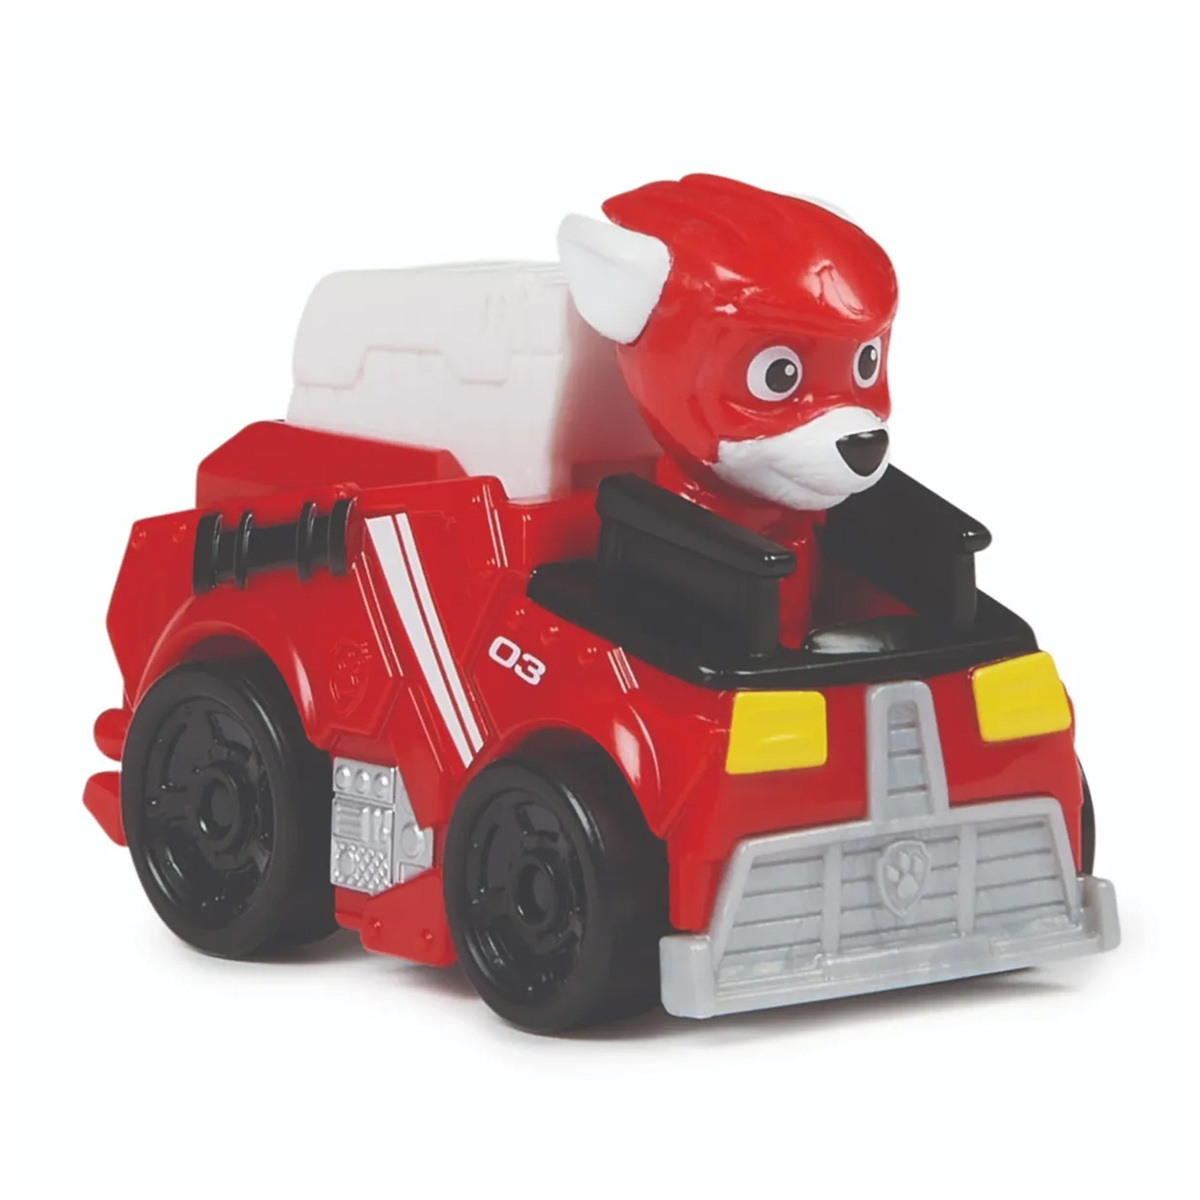 Paw Patrol Movie Pups Squad Racer Toy, Assorted, 6067086